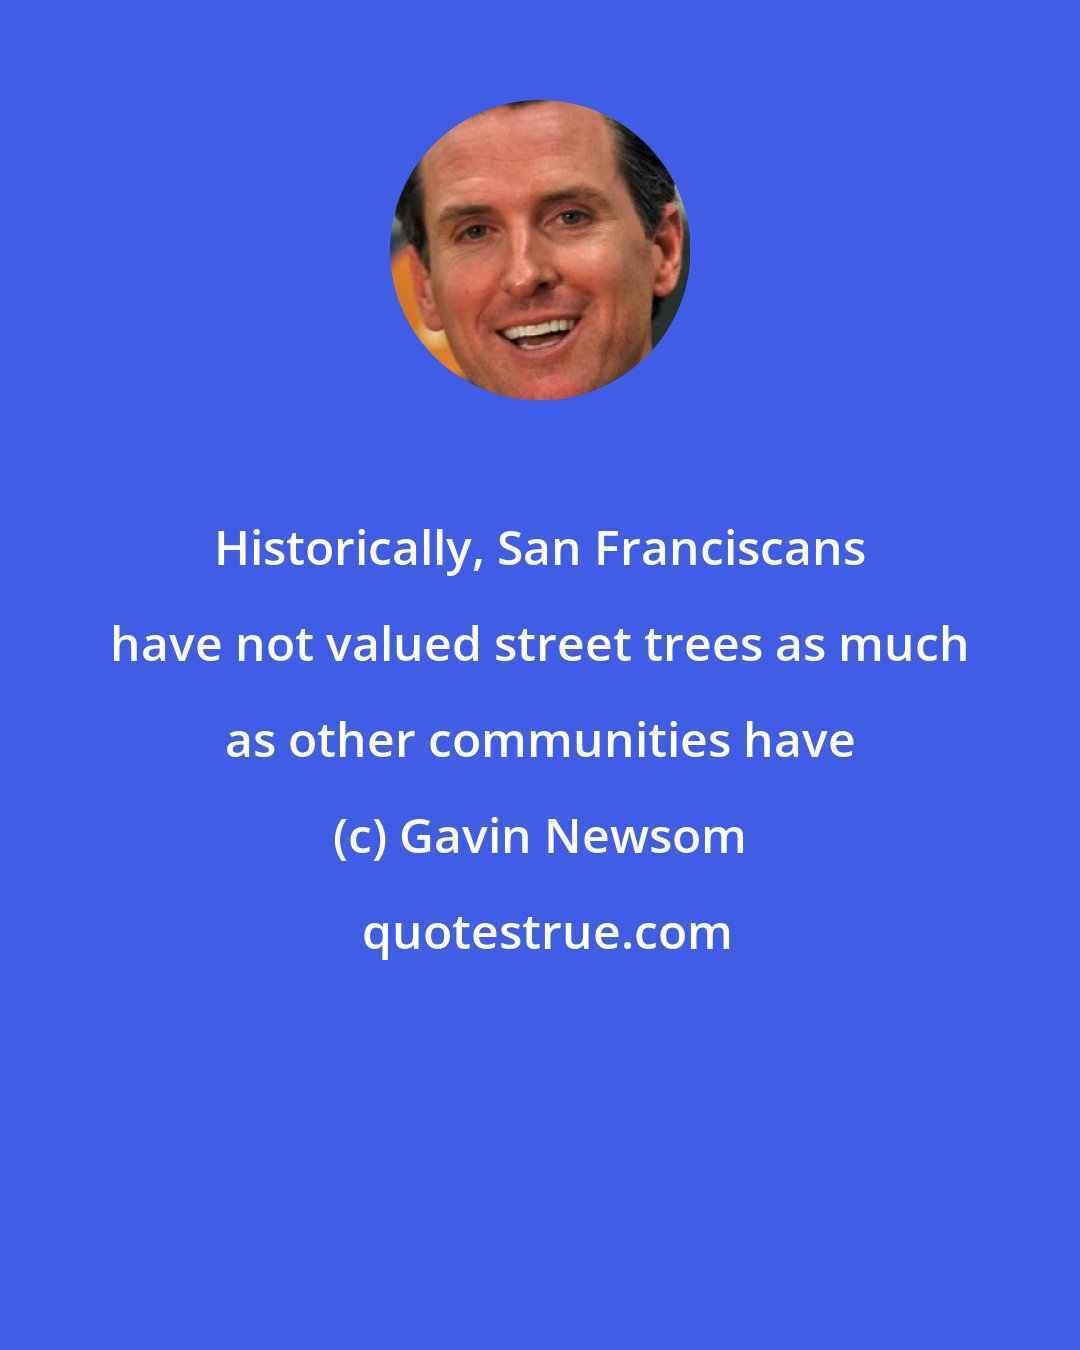 Gavin Newsom: Historically, San Franciscans have not valued street trees as much as other communities have